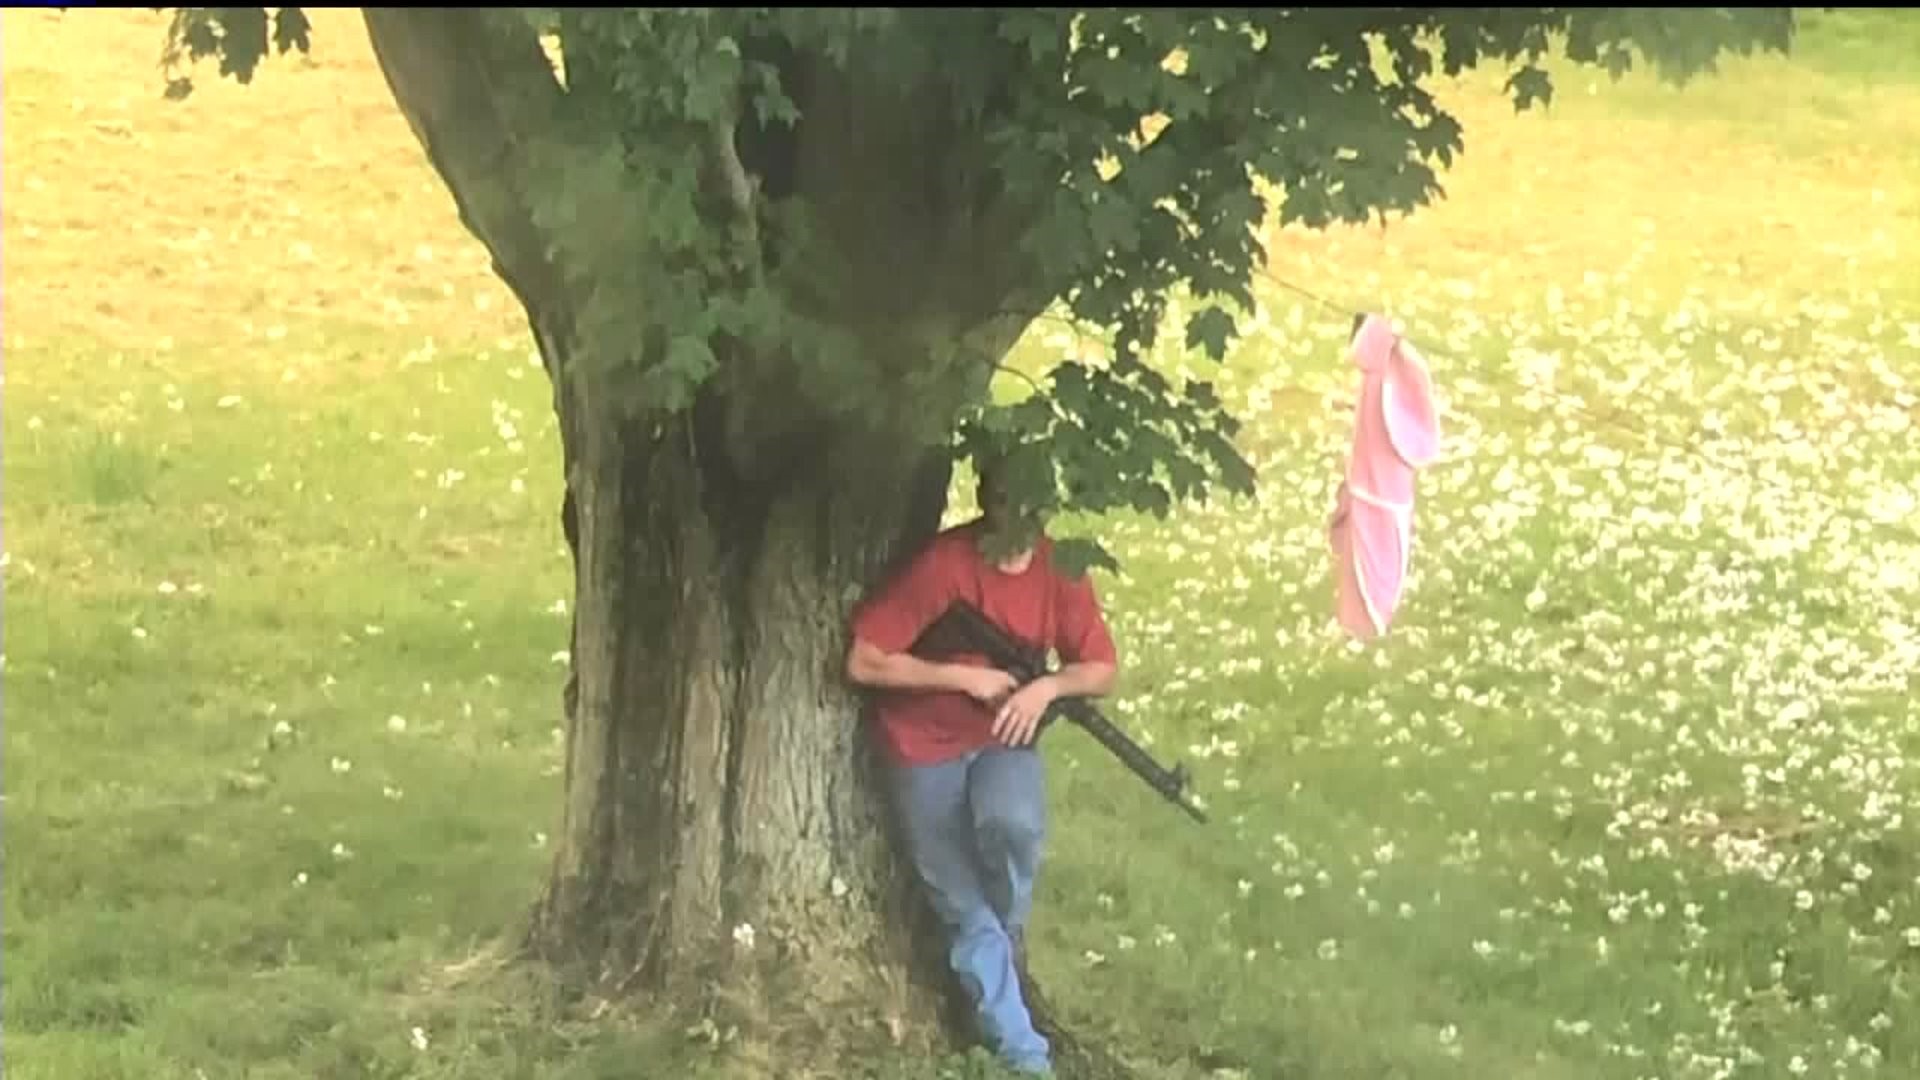 Man with Rifle Sparks Big Police Response